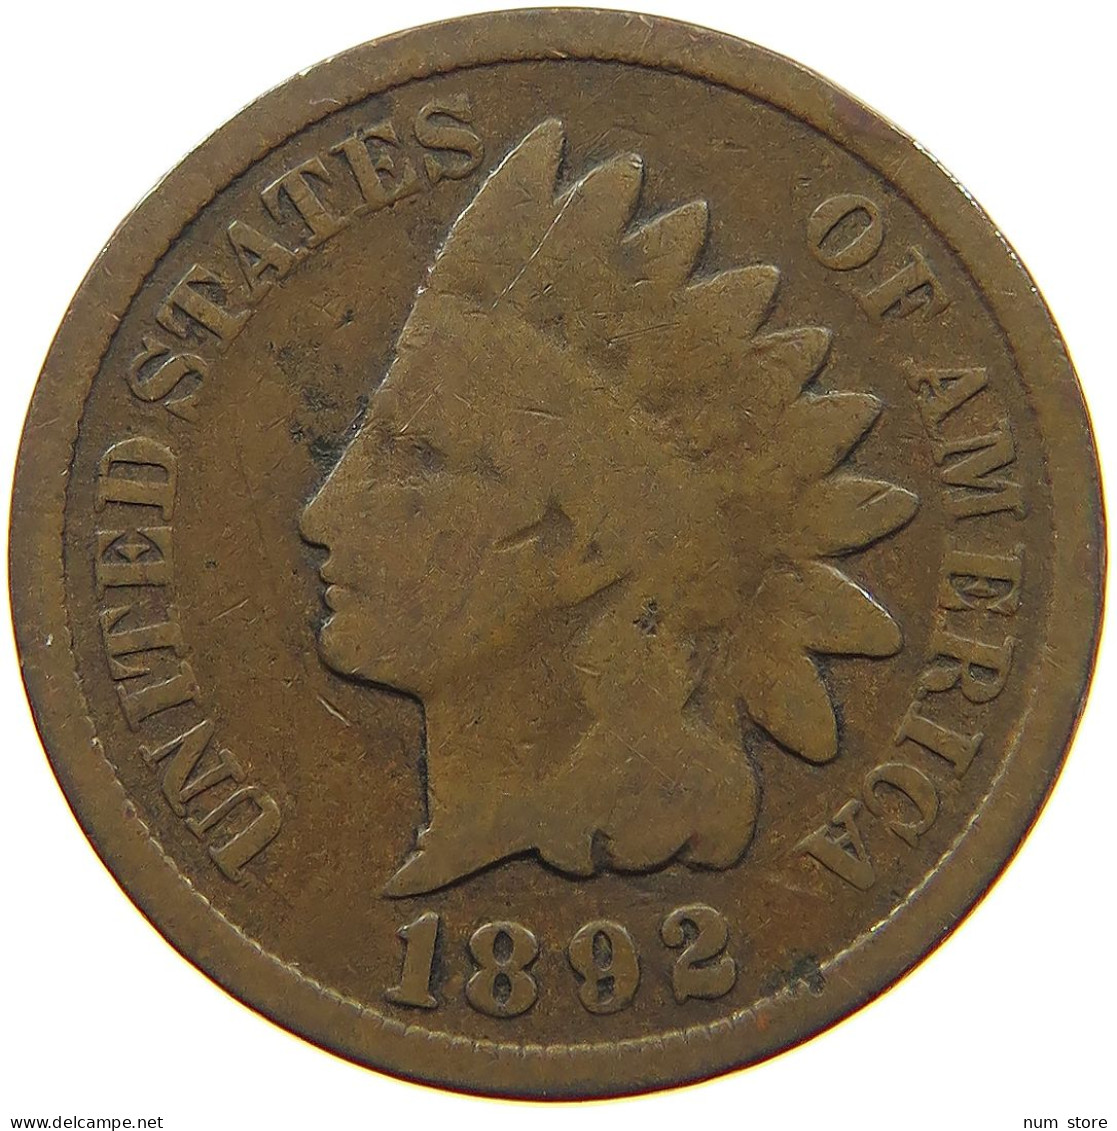 UNITED STATES OF AMERICA CENT 1892 INDIAN HEAD #s063 0235 - 1859-1909: Indian Head